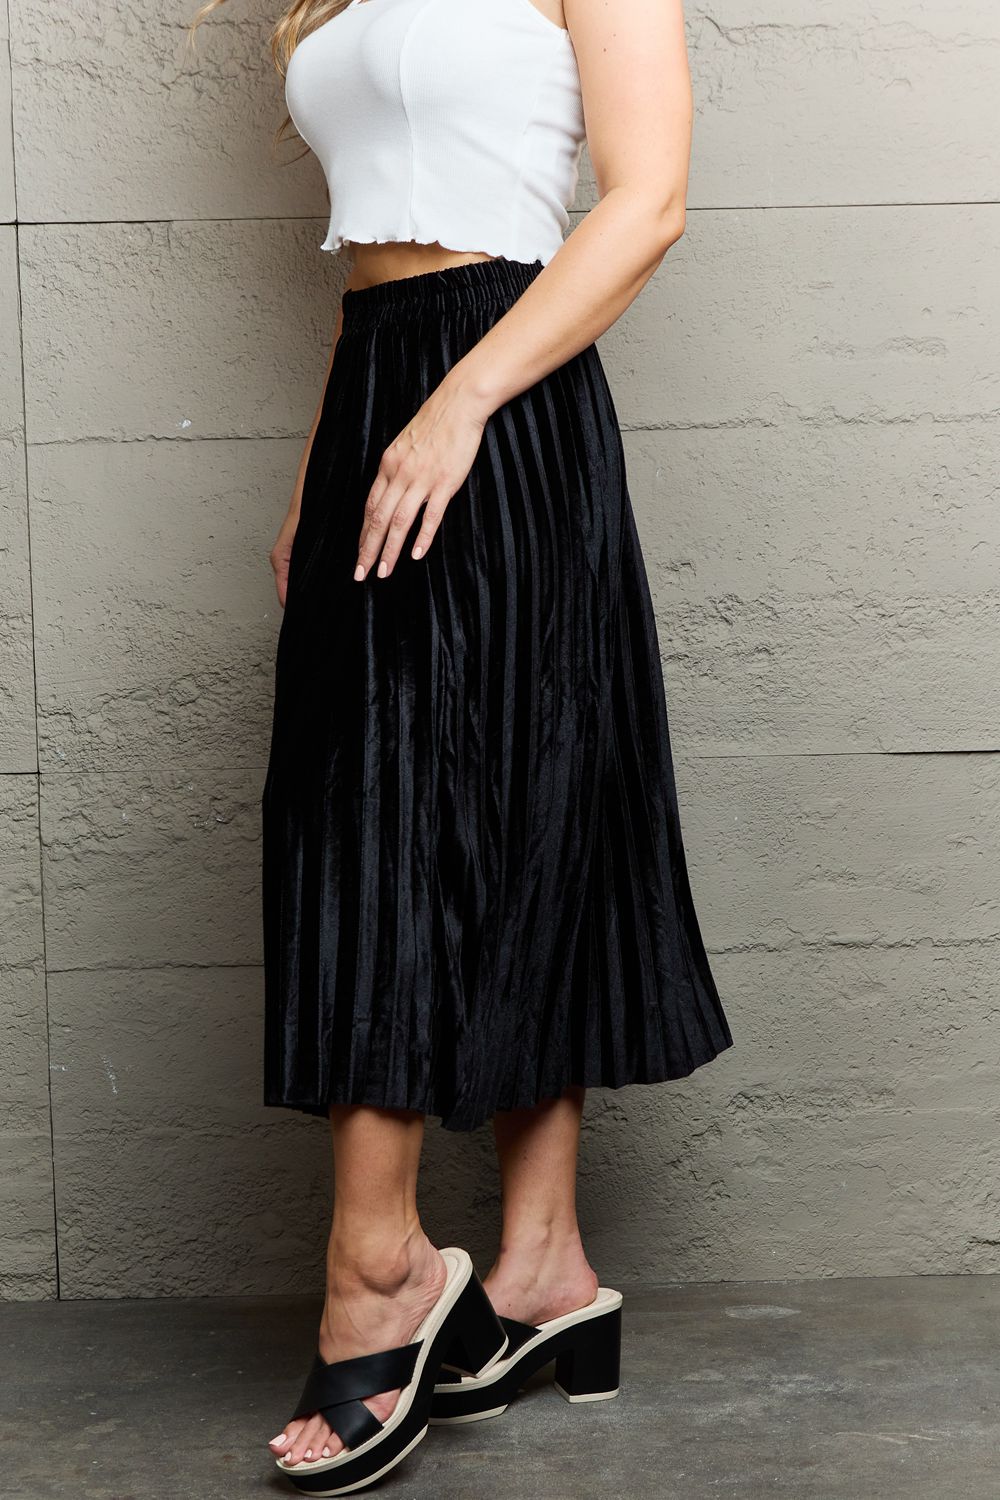 Ninexis Accordion Pleated Flowy Midi Skirt - Online Only